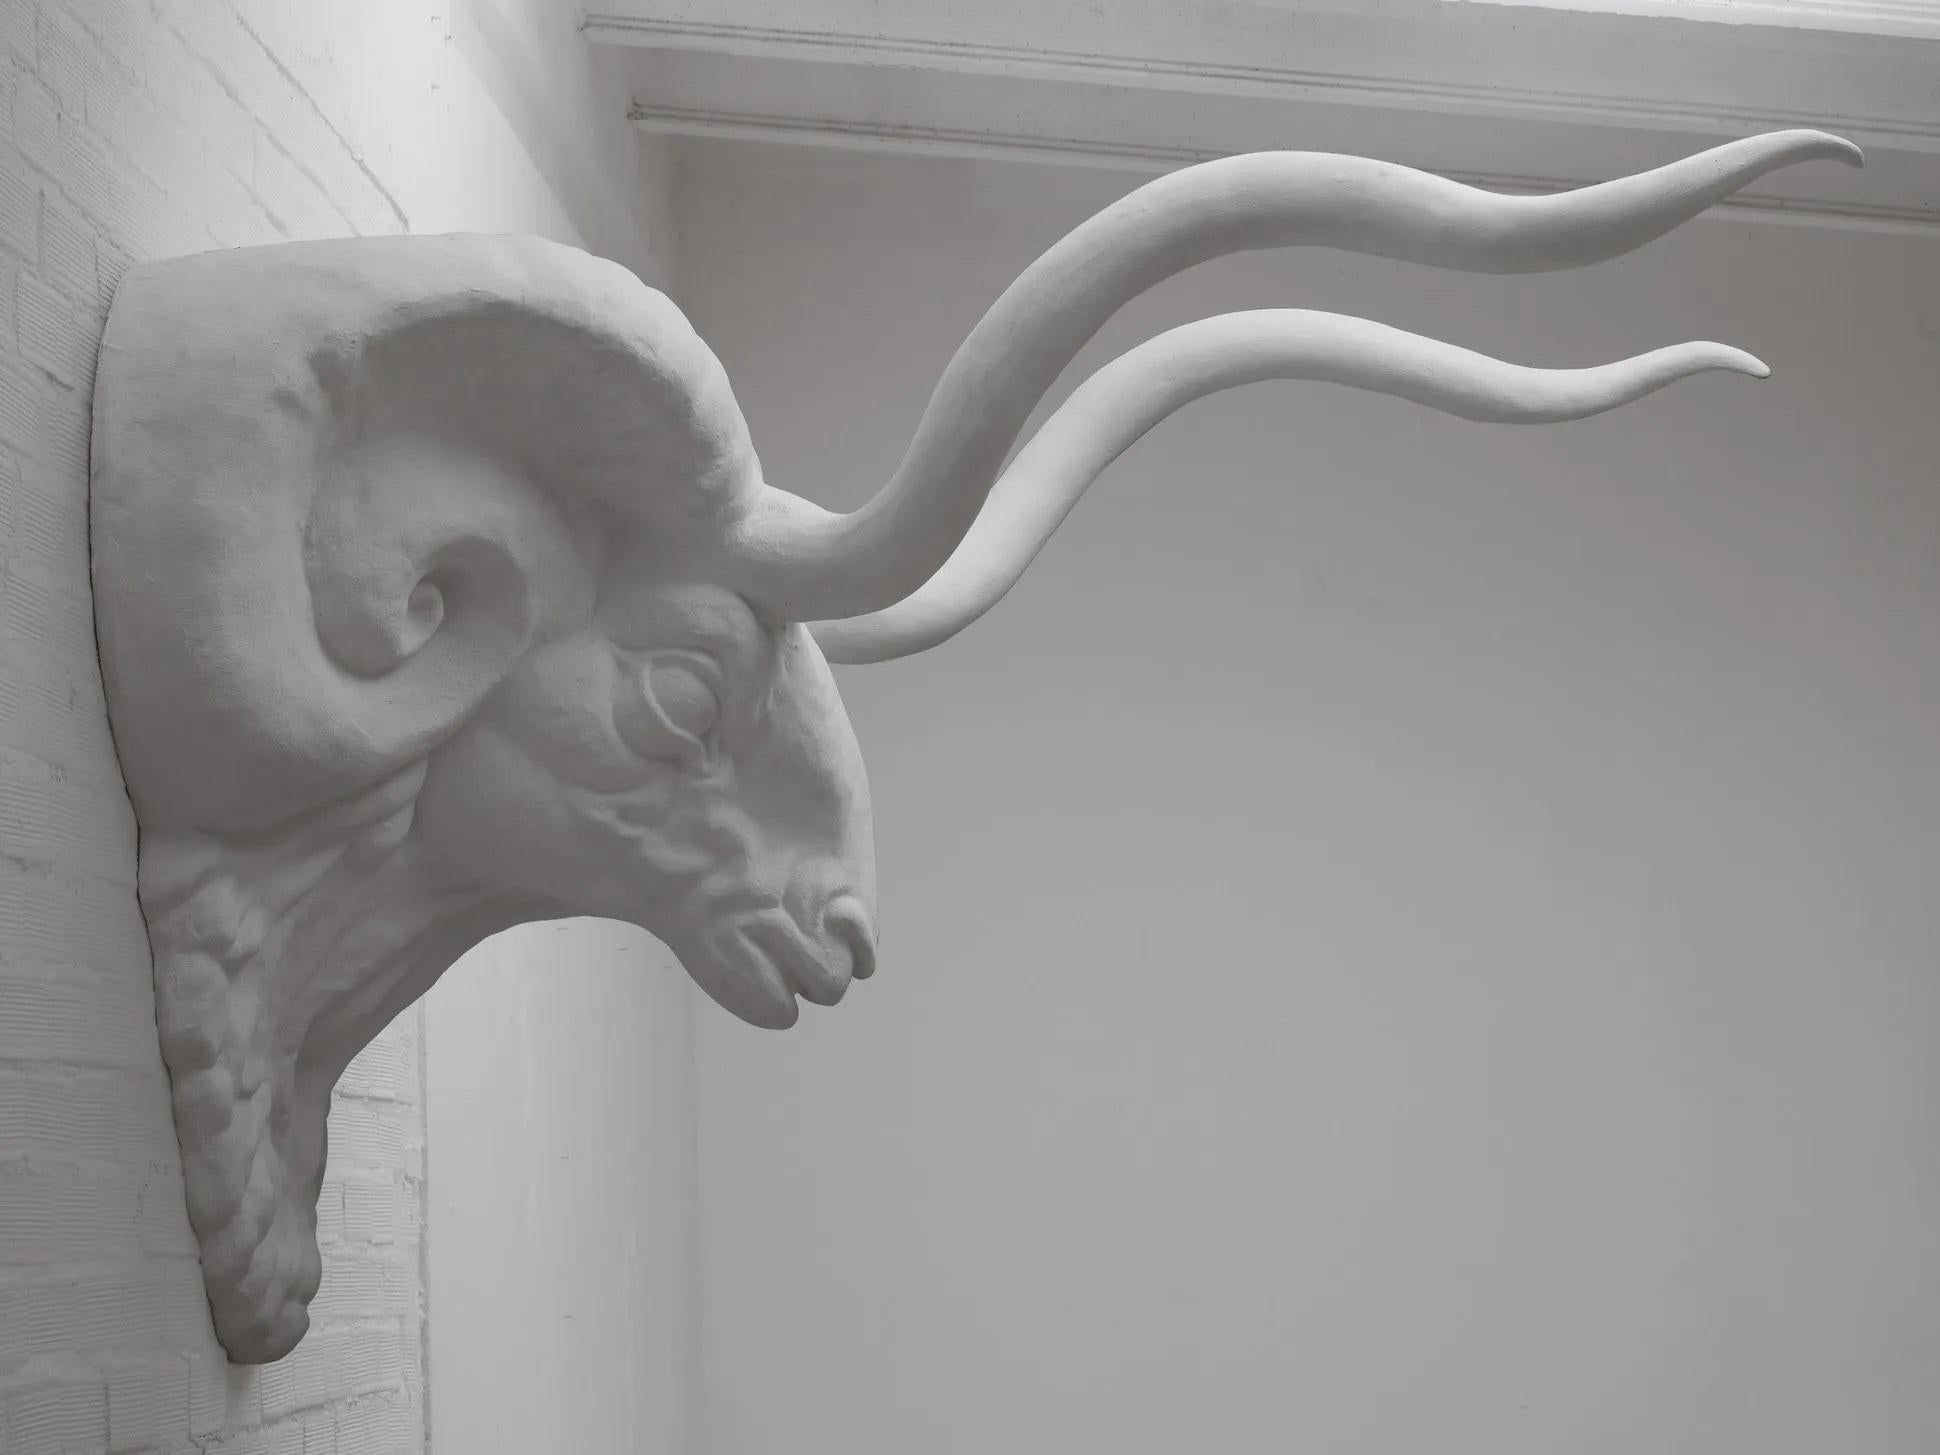 Uno sculpture by Imperfettolab
Limited edition
Dimensions: 176 x 240 x H 180
Materials: fiberglass

A ram, symbol of genesis and rebirth, seems to contemplate the room from its privileged position, attracting all eyes to itself. A sculptural